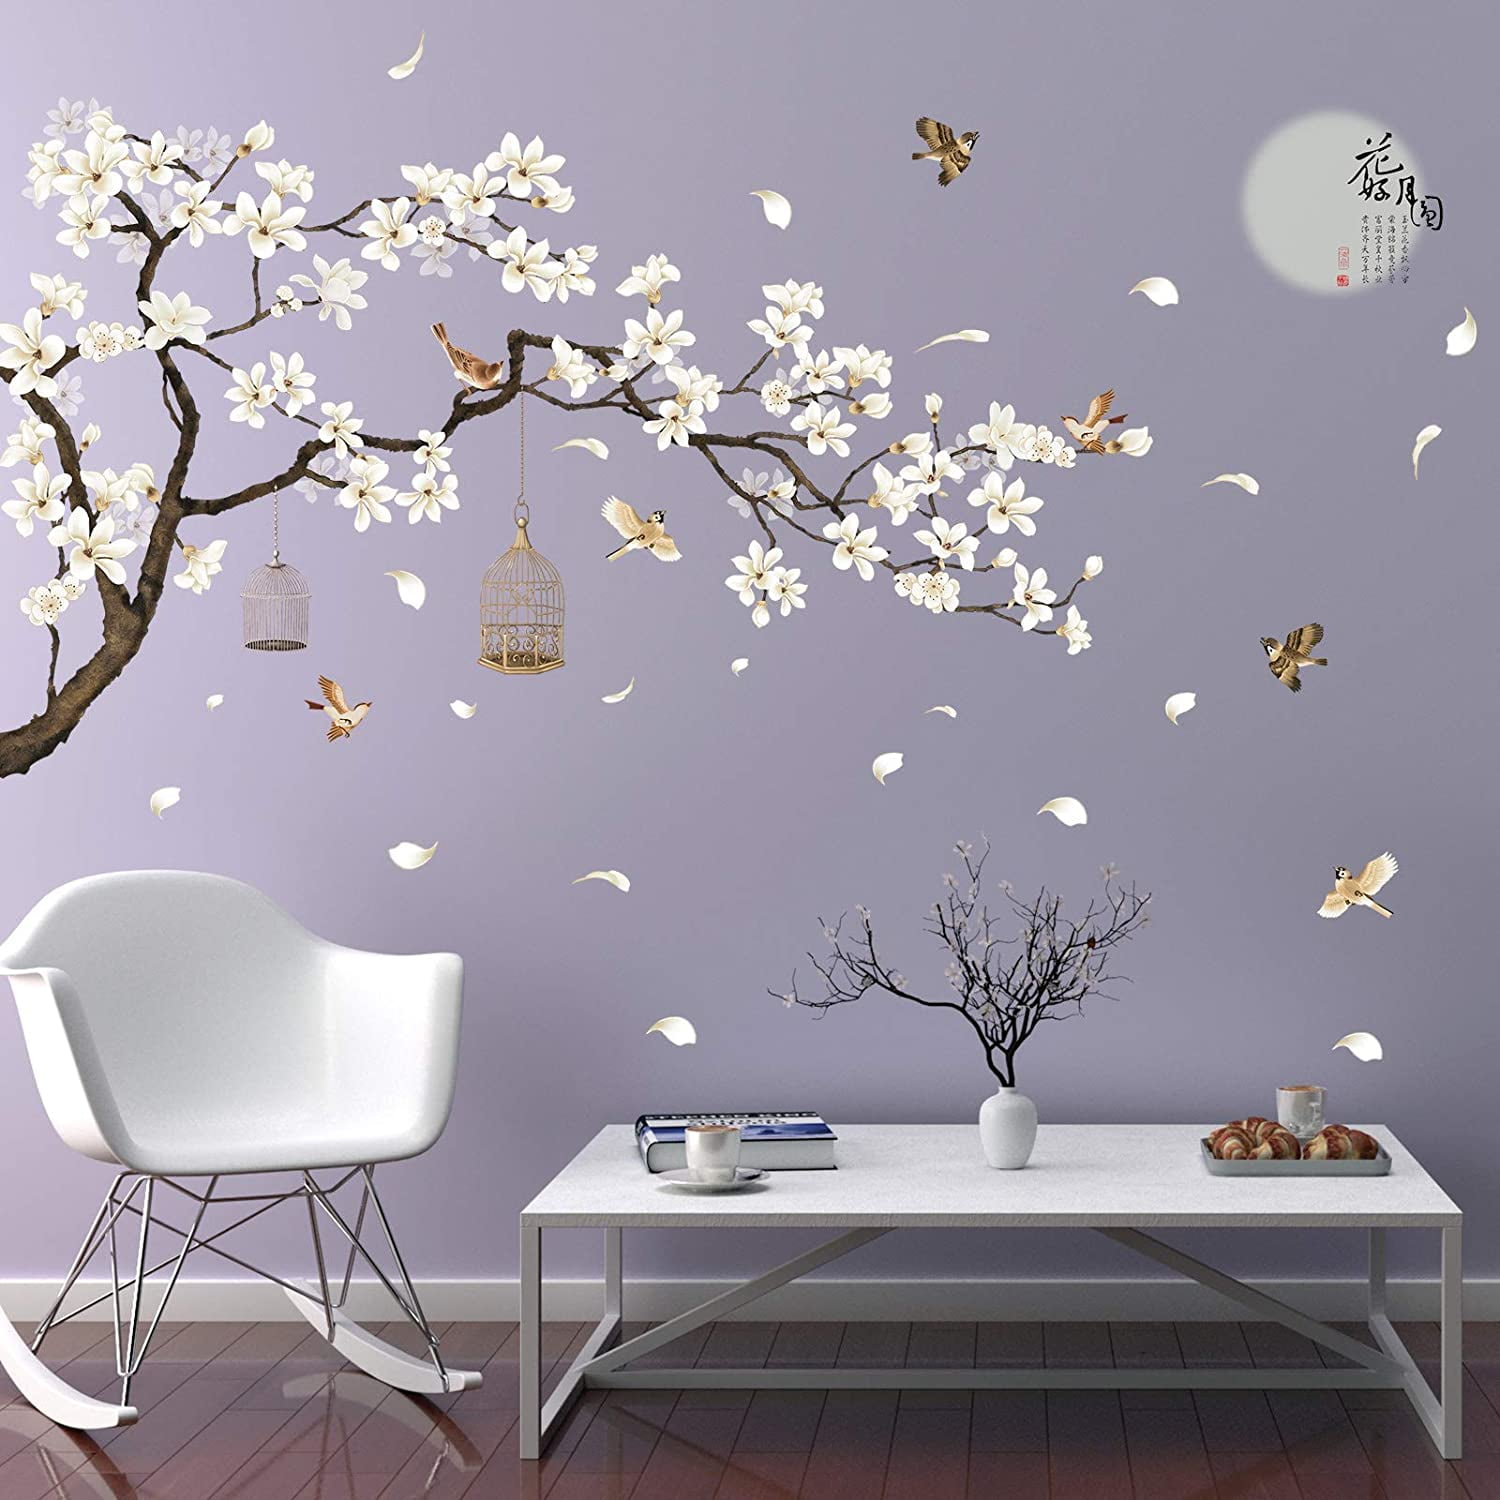 Removable 3D Large View Wall Sticker Kids Home Room Mural Wallpaper Decor Decals 